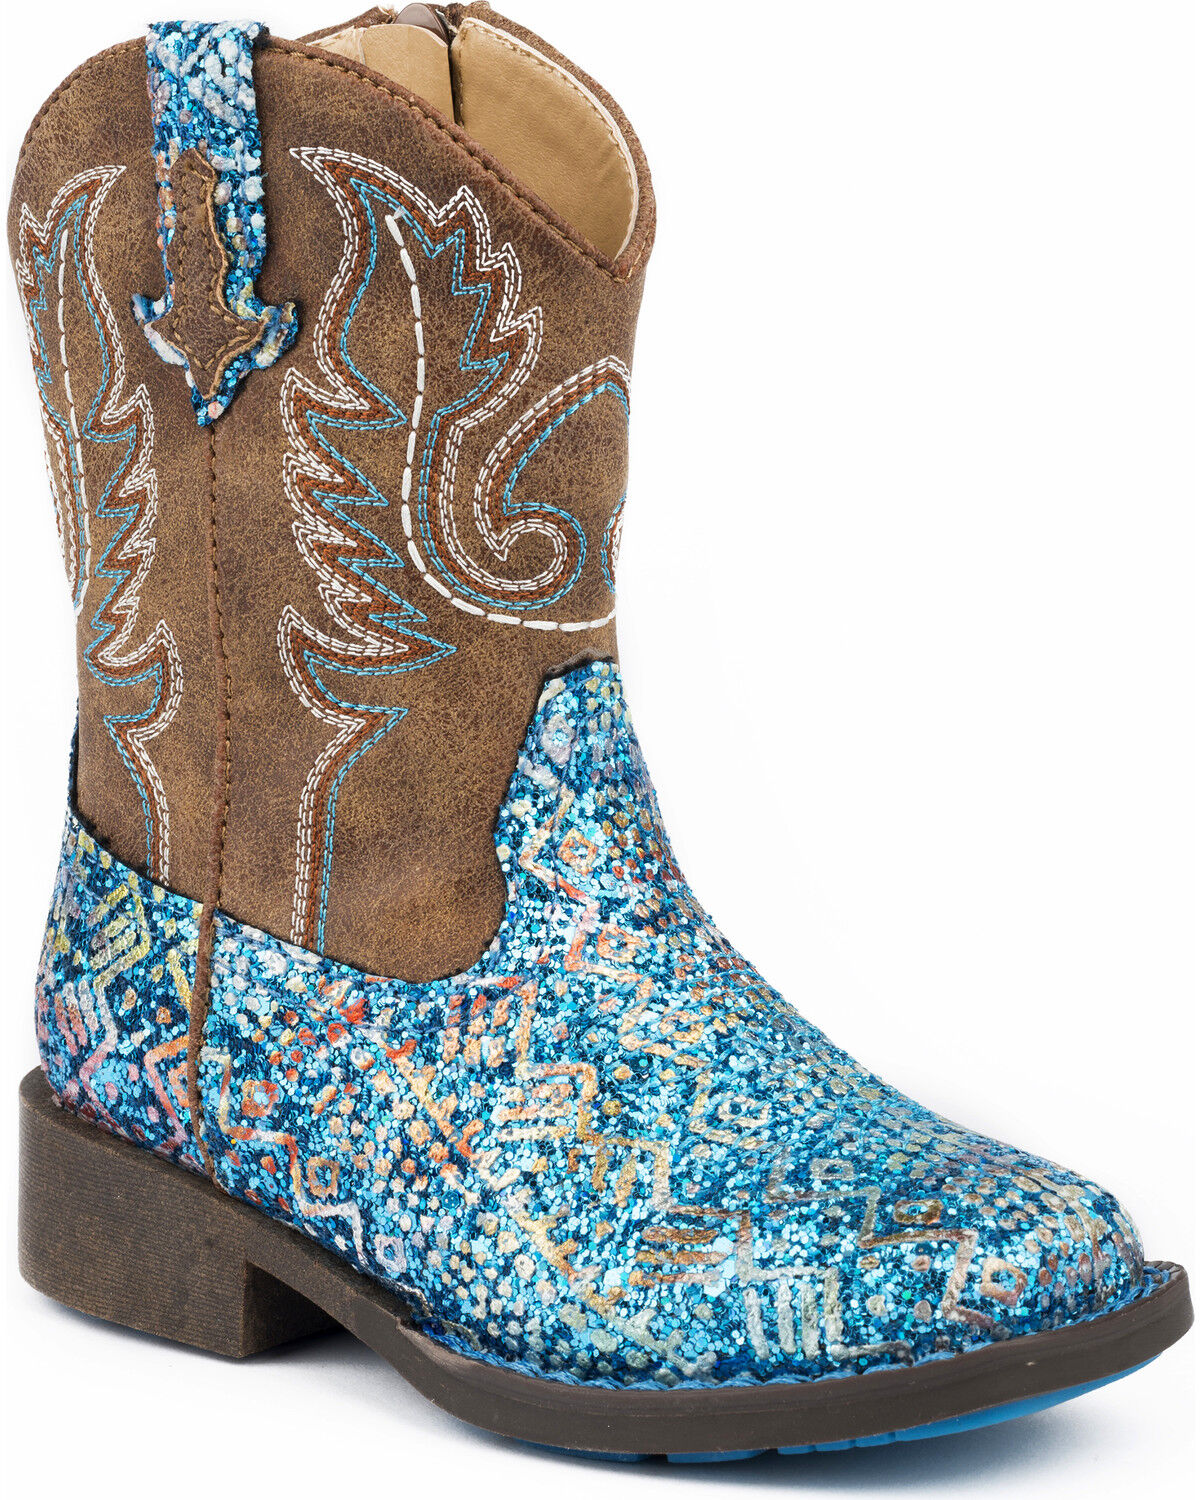 Roper Toddler-Girls' Turquoise Glitter Horse Light-Up Cowgirl Boot Round Toe Tan 